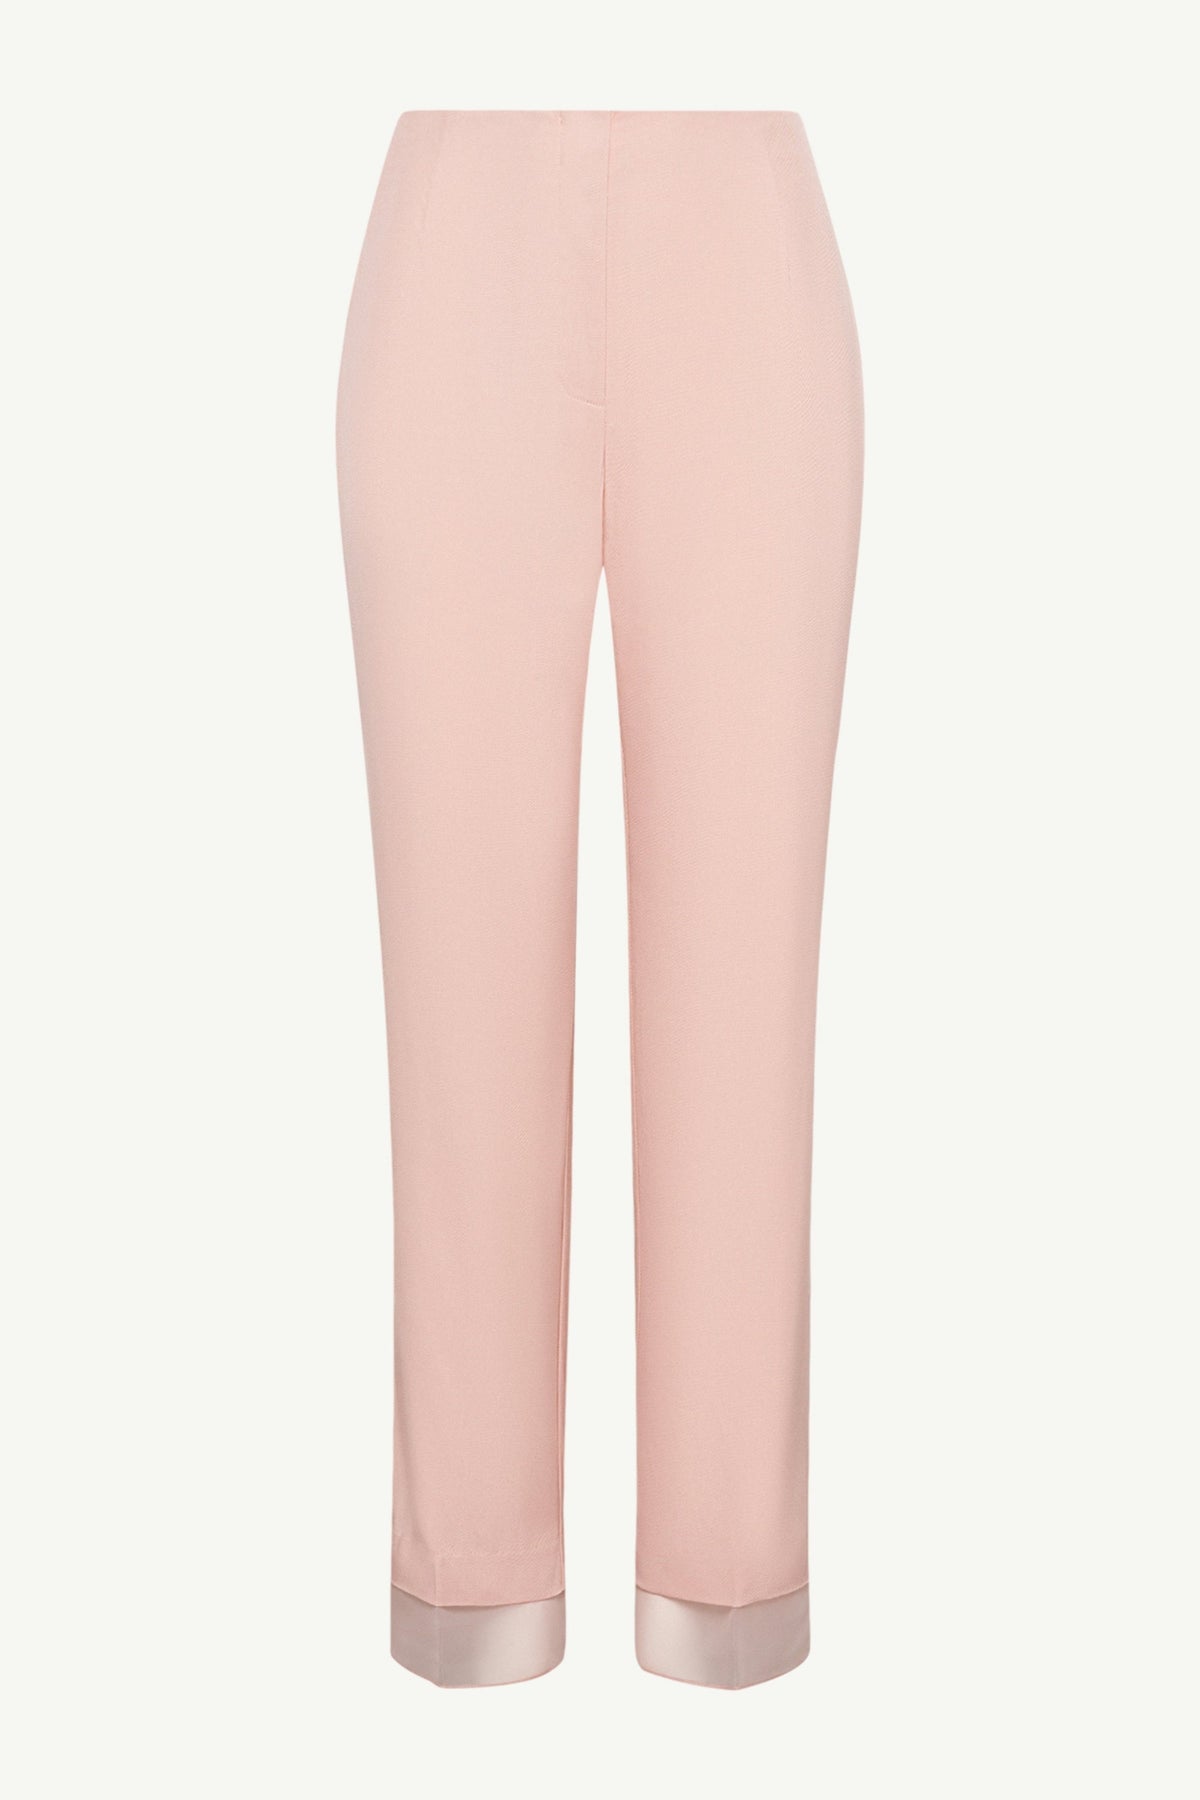 Rayan Organza Trim Trousers - Sepia Rose Clothing Veiled 